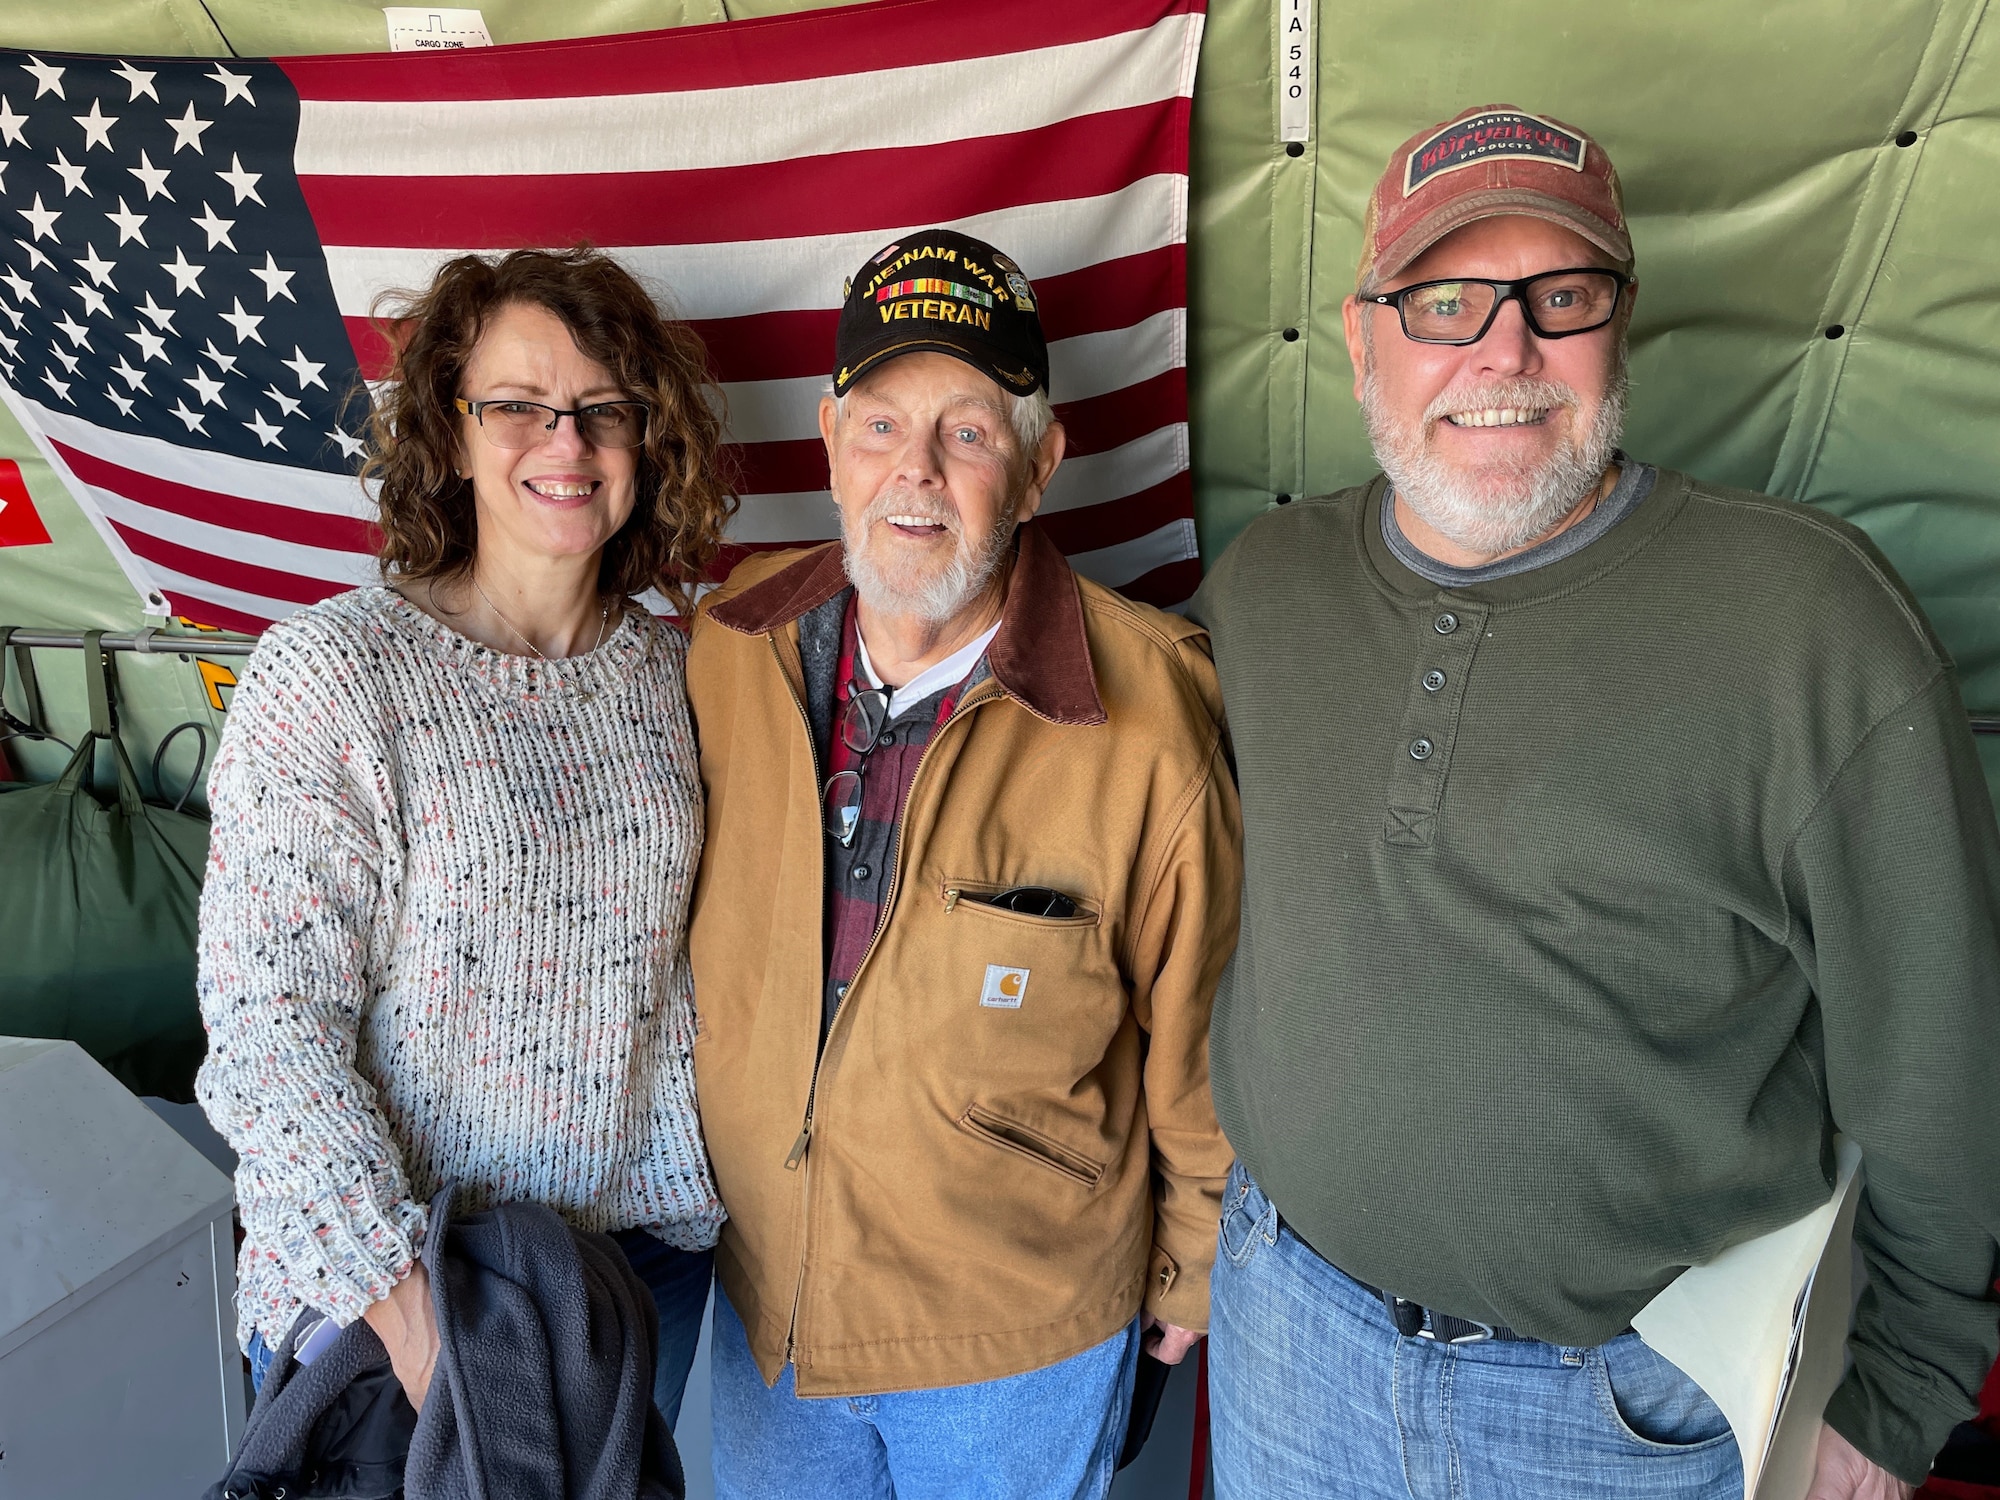 Vietnam Veteran James Roberts (center) along with Susan and Keith Roberts, his daughter-in-law and son, all from Brandon, Mississippi, tour a 186th Air Refueling Wing KC-135R aircraft at Key Field Air National Guard Base, Mississippi, Nov. 6, 2021.